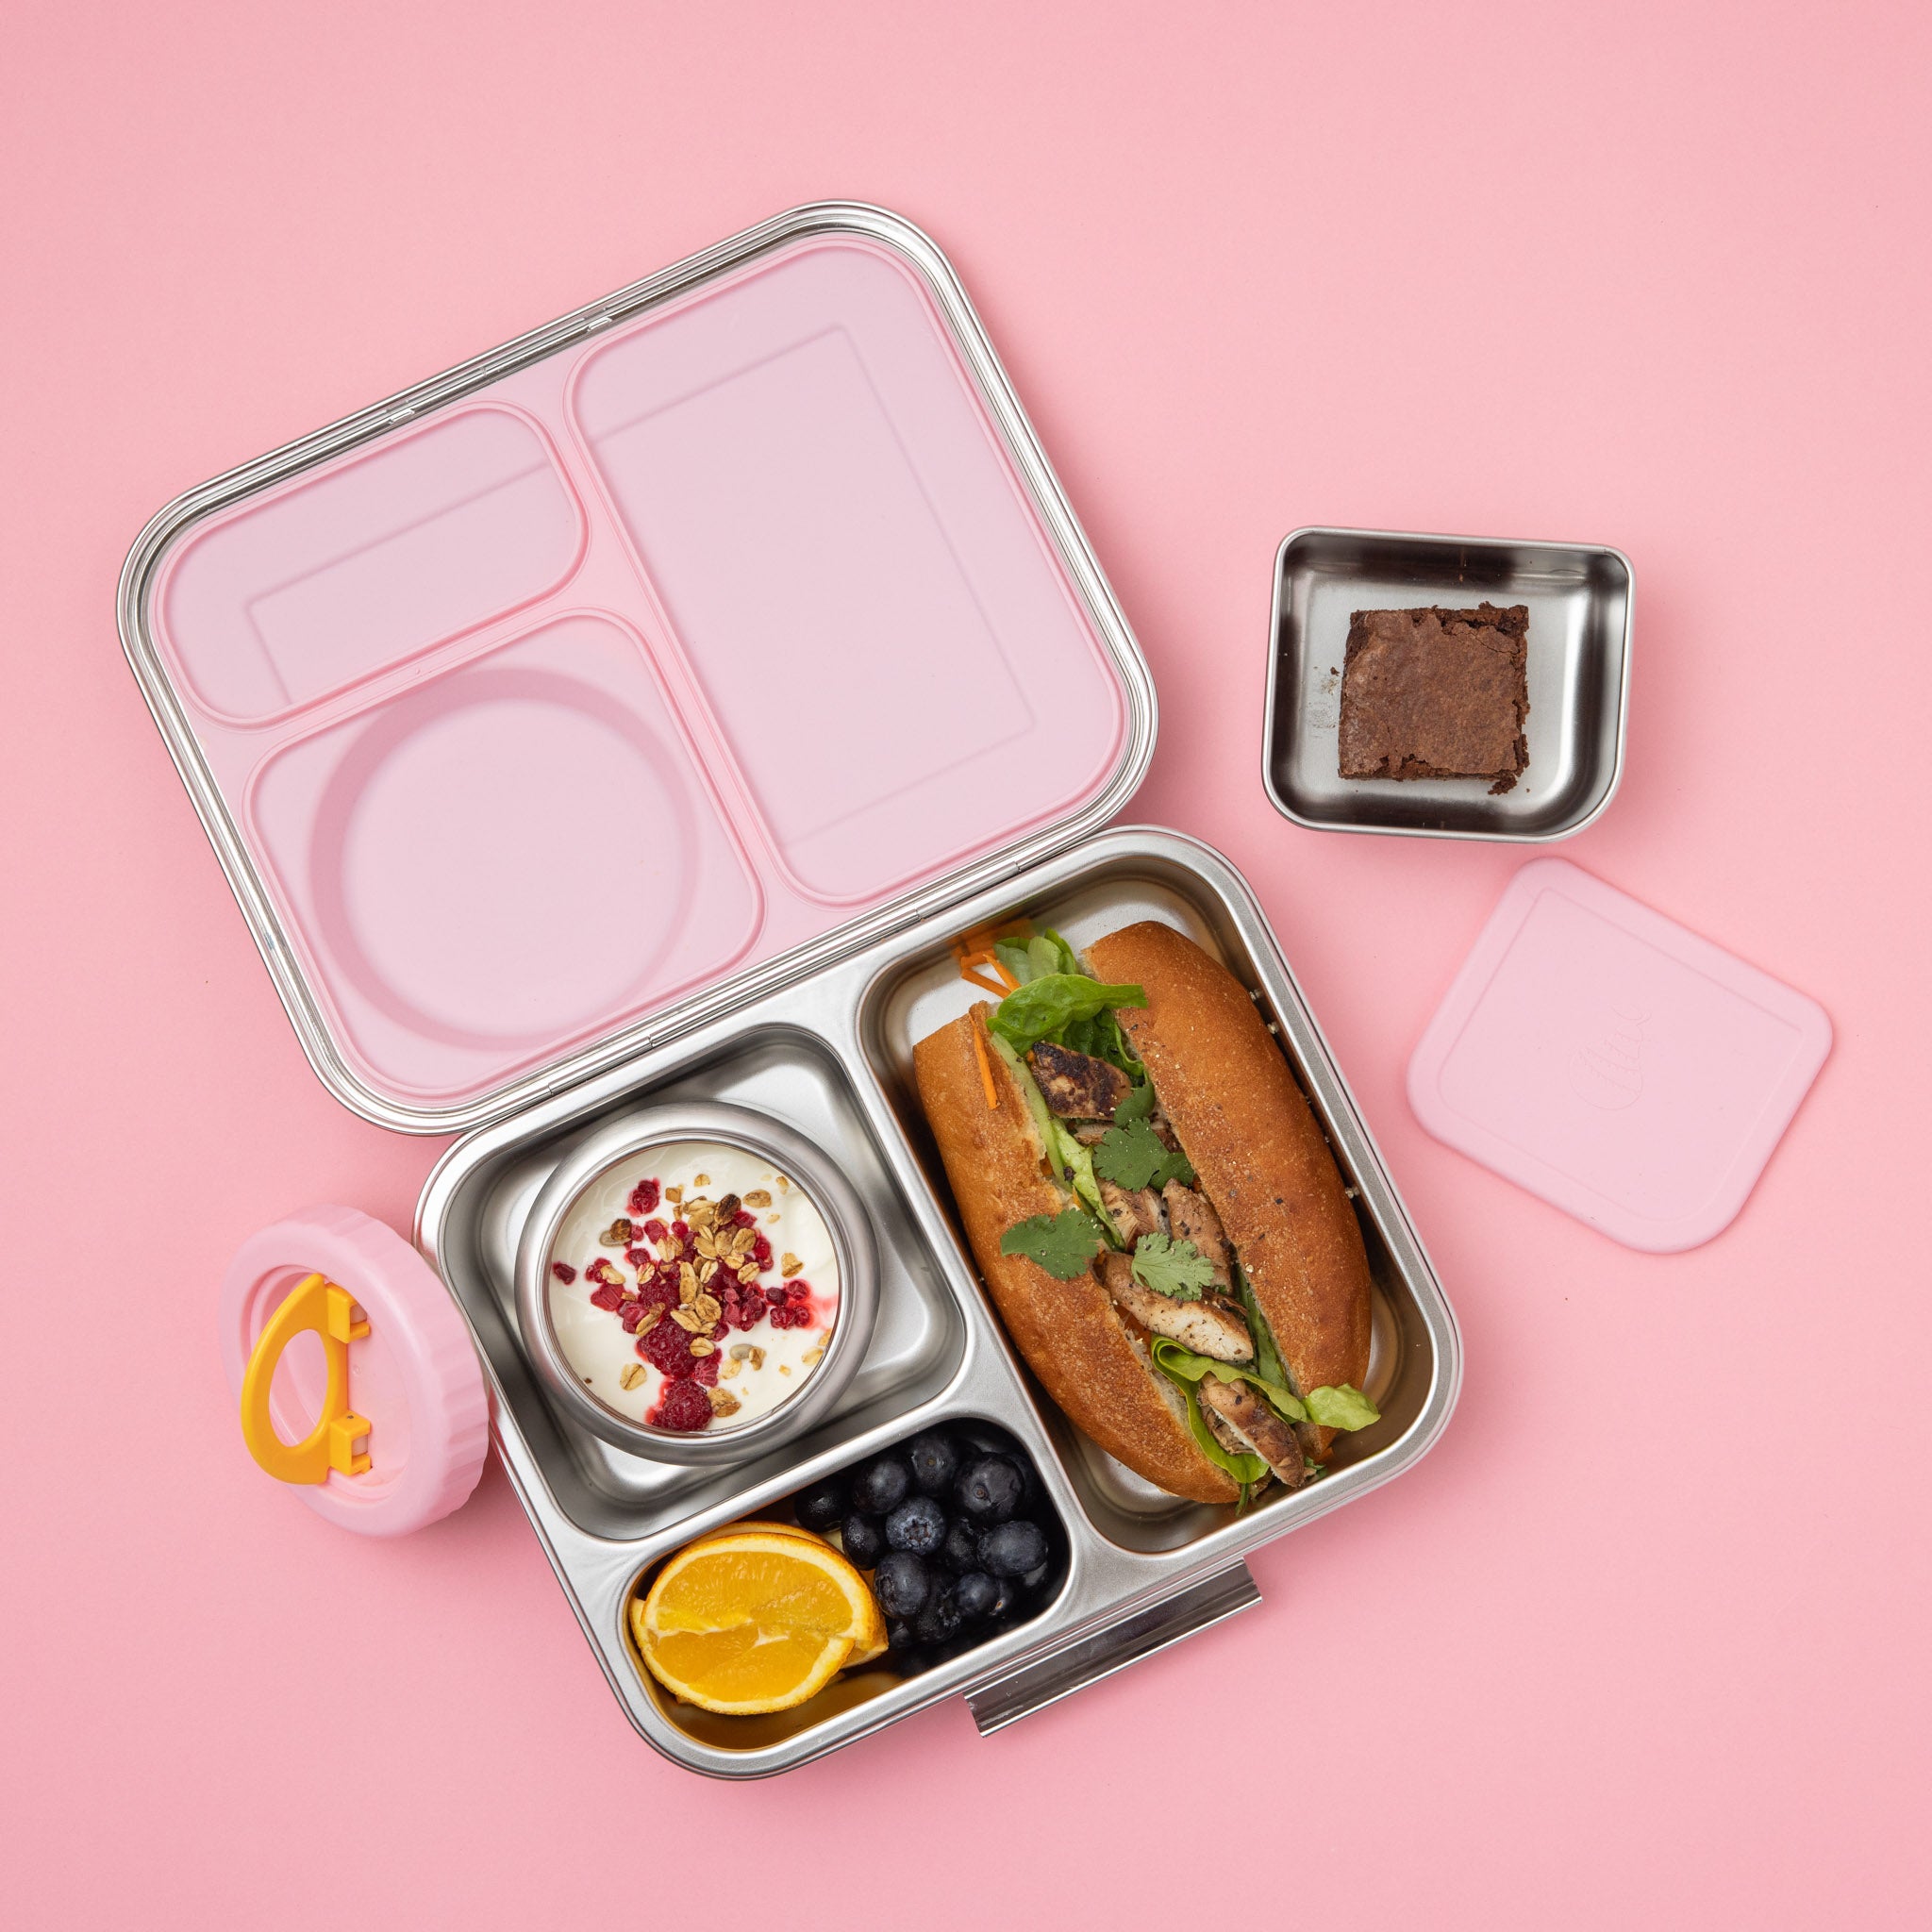 stainless steel 3 compartment bento box with light pink silicone seal and insulated food jar plus snack container filled with a variety of food